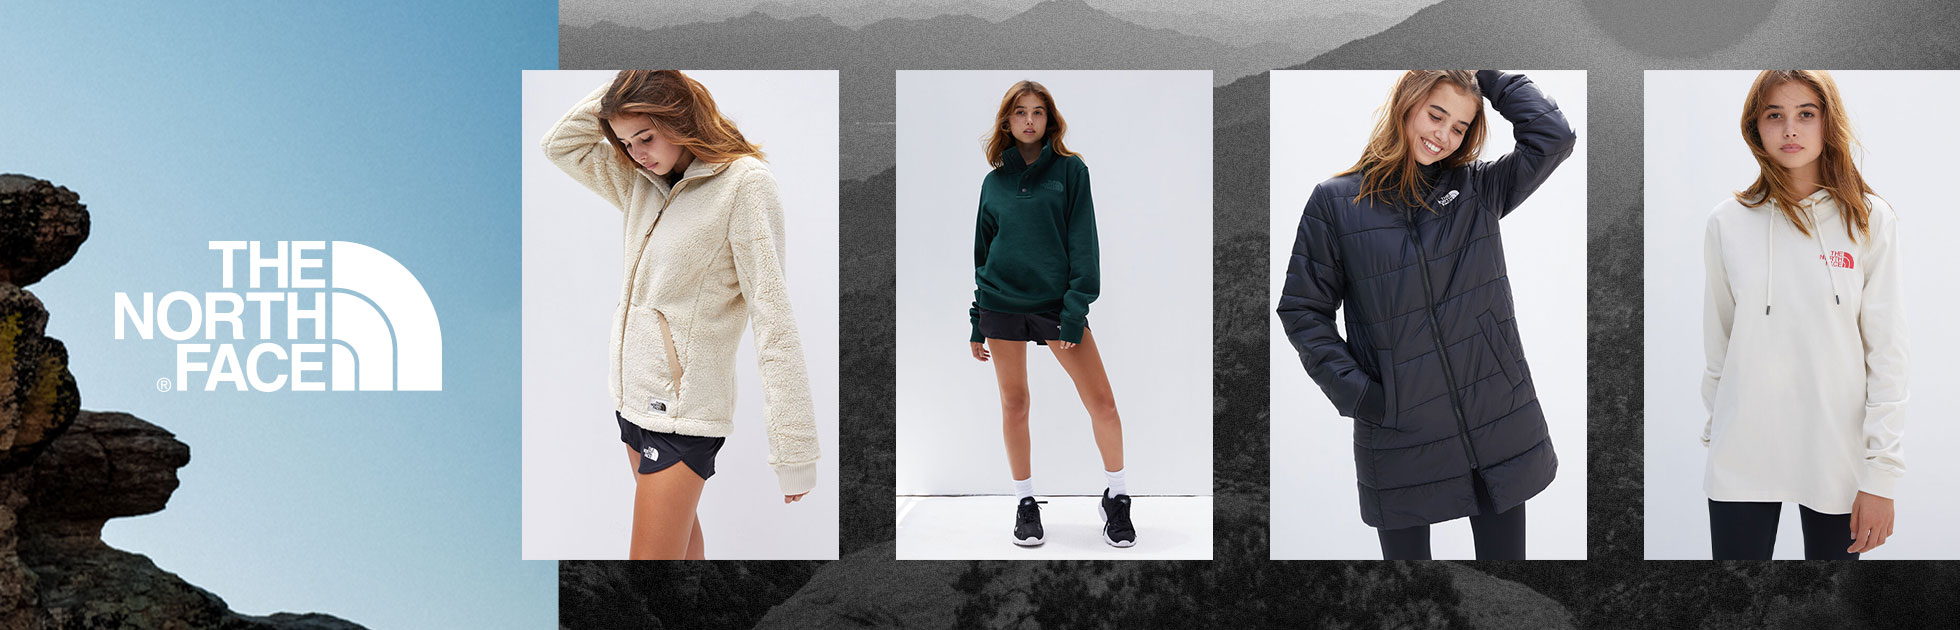 The North Face for Women | PacSun